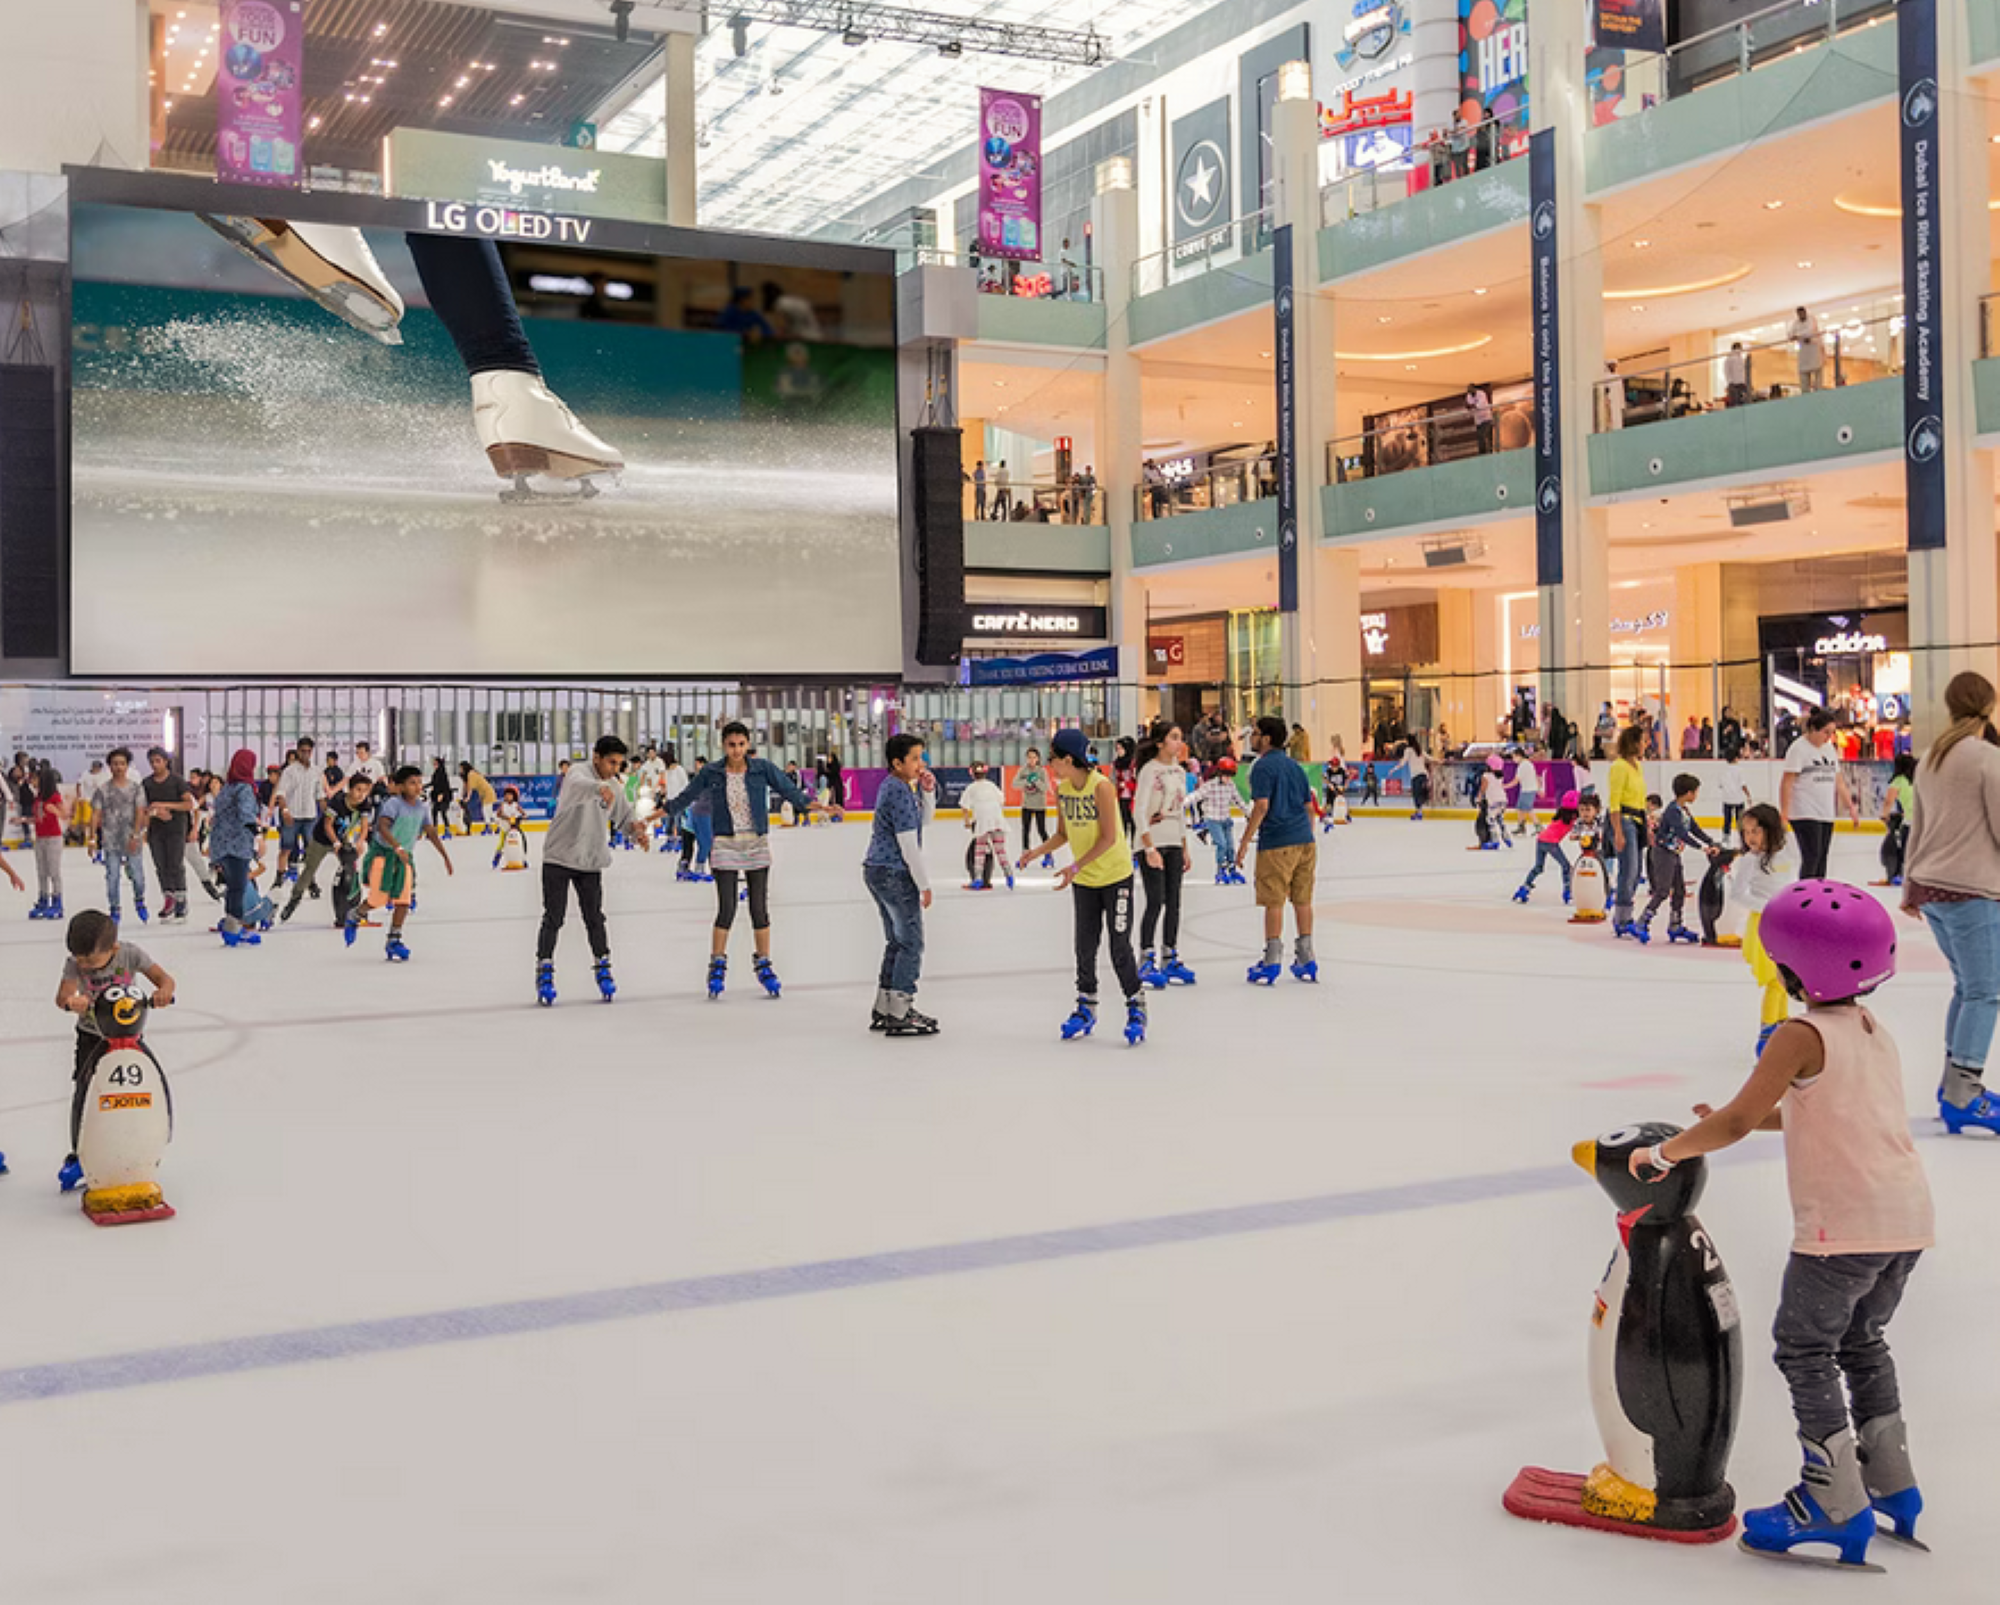 What to do in Dubai with kids - Dubai Ice Rink